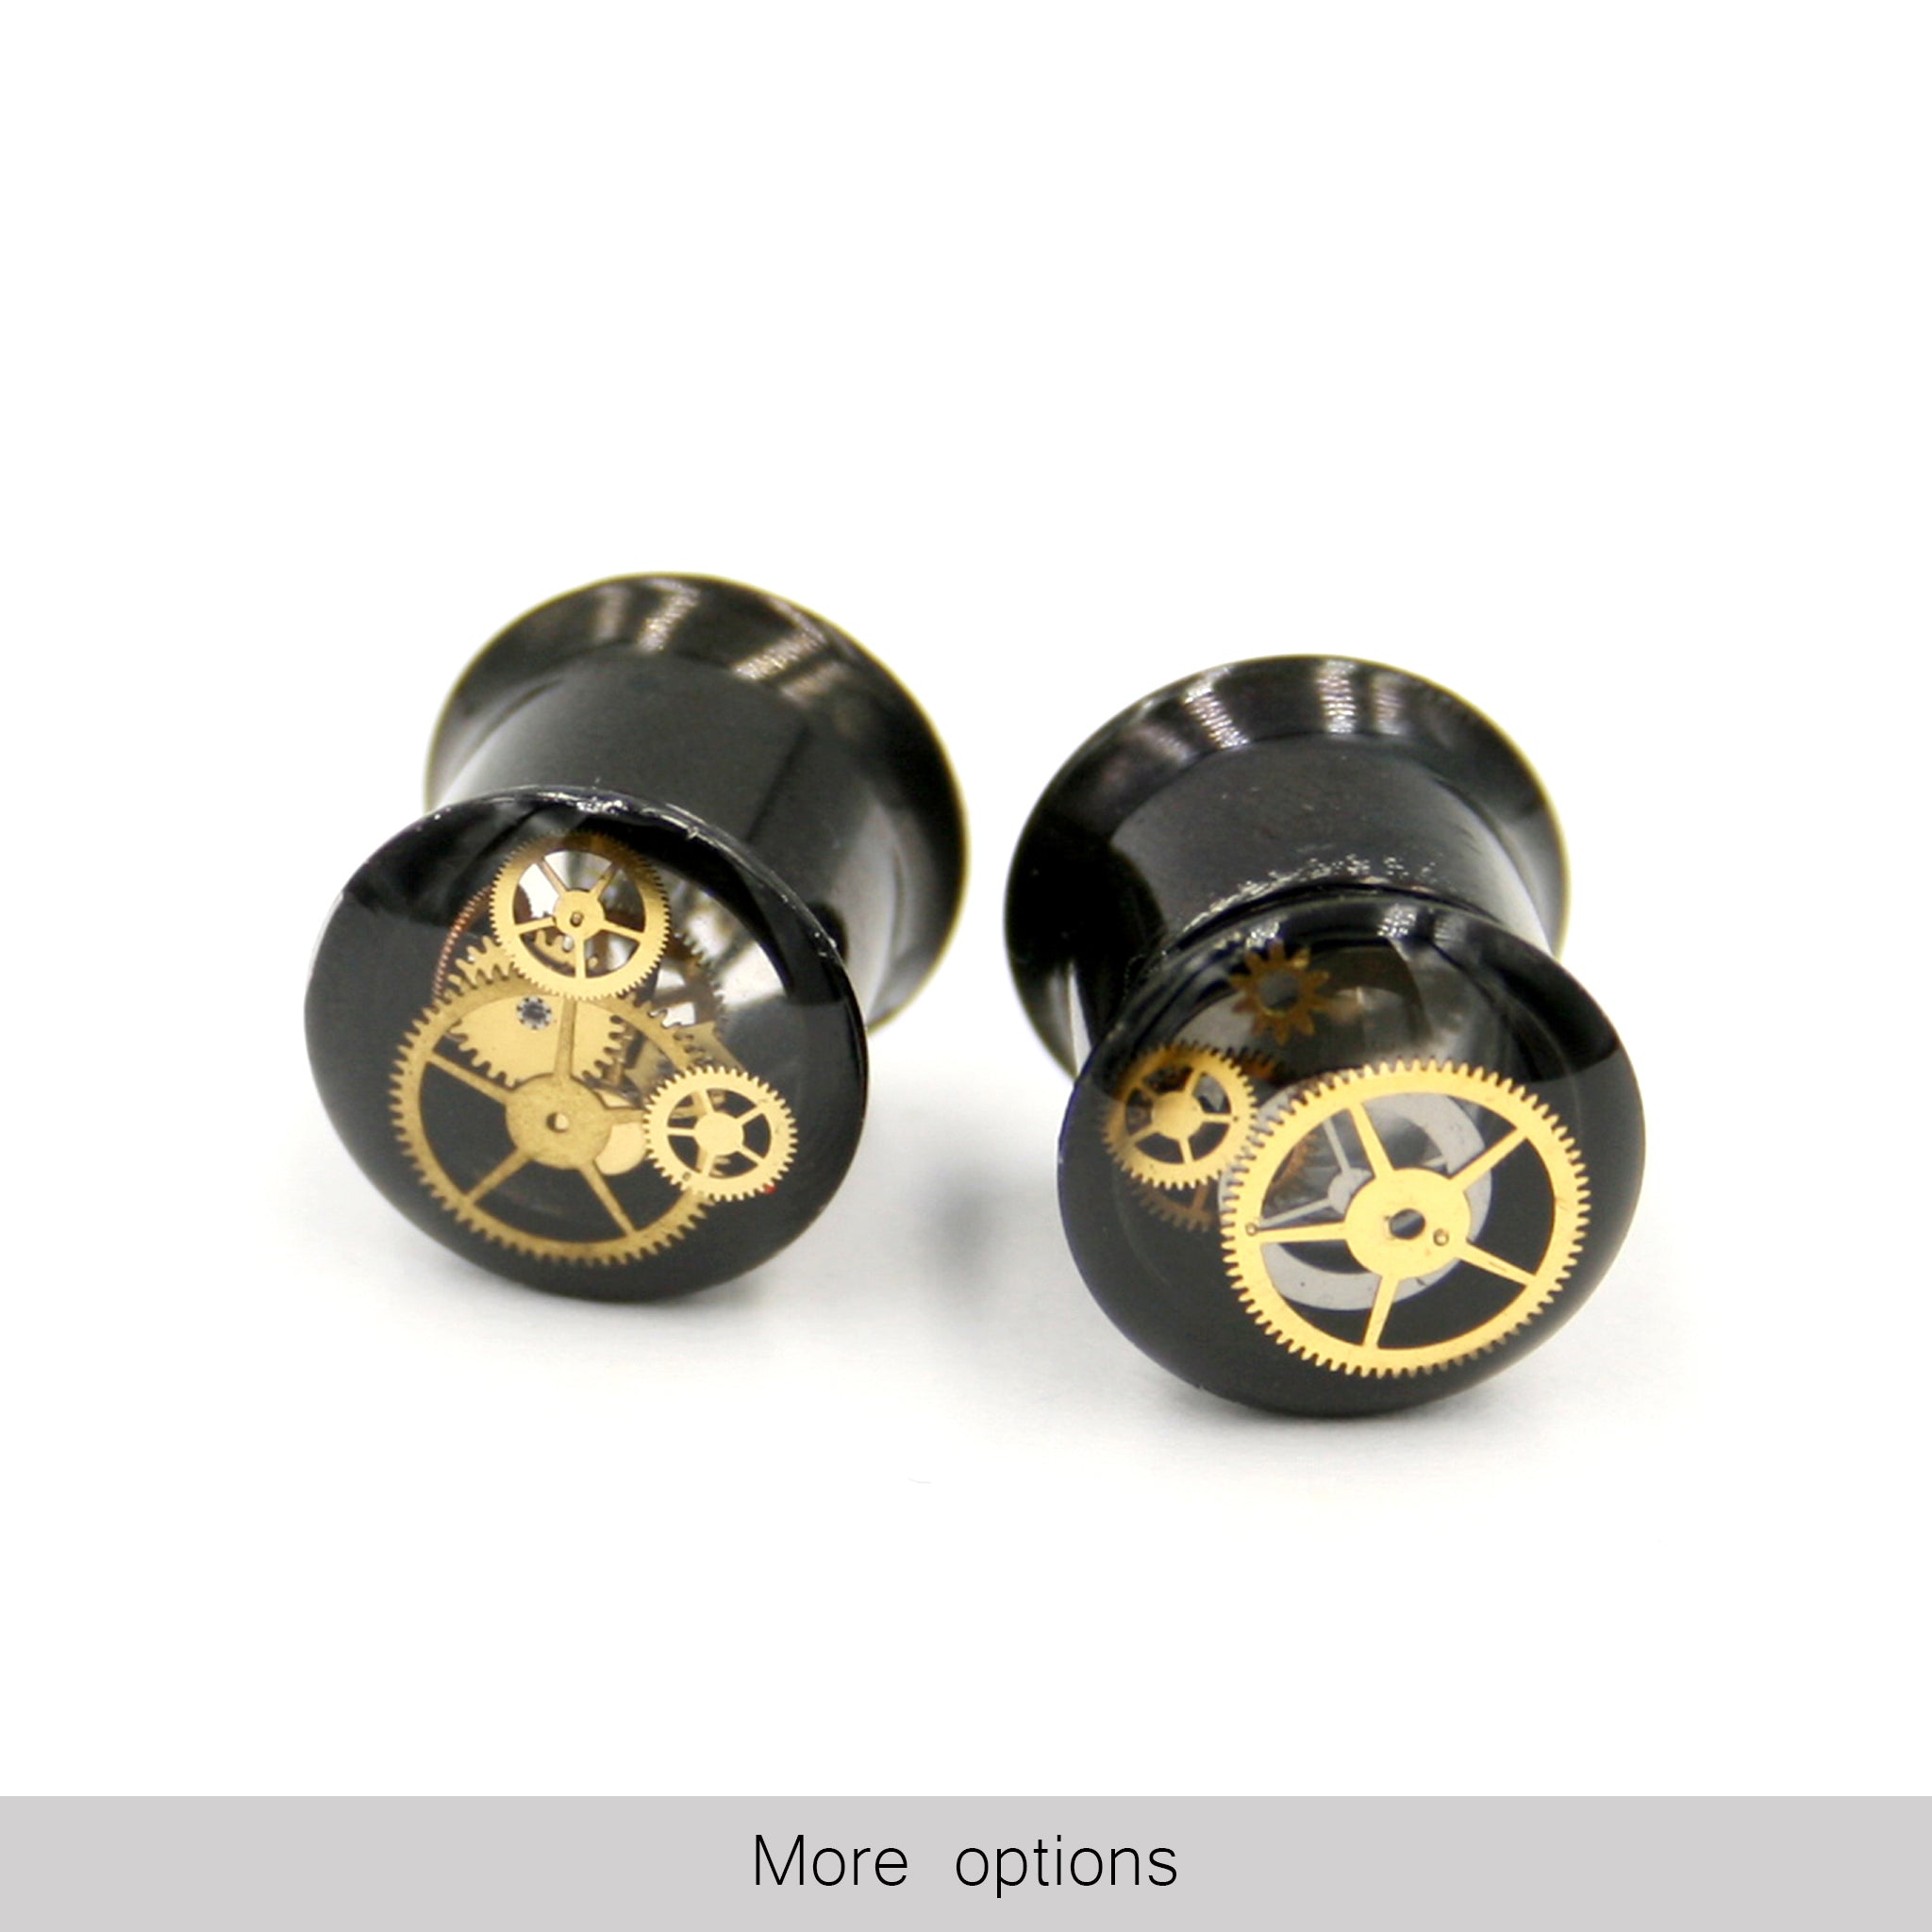 8mm small ear gauges in steampunk style